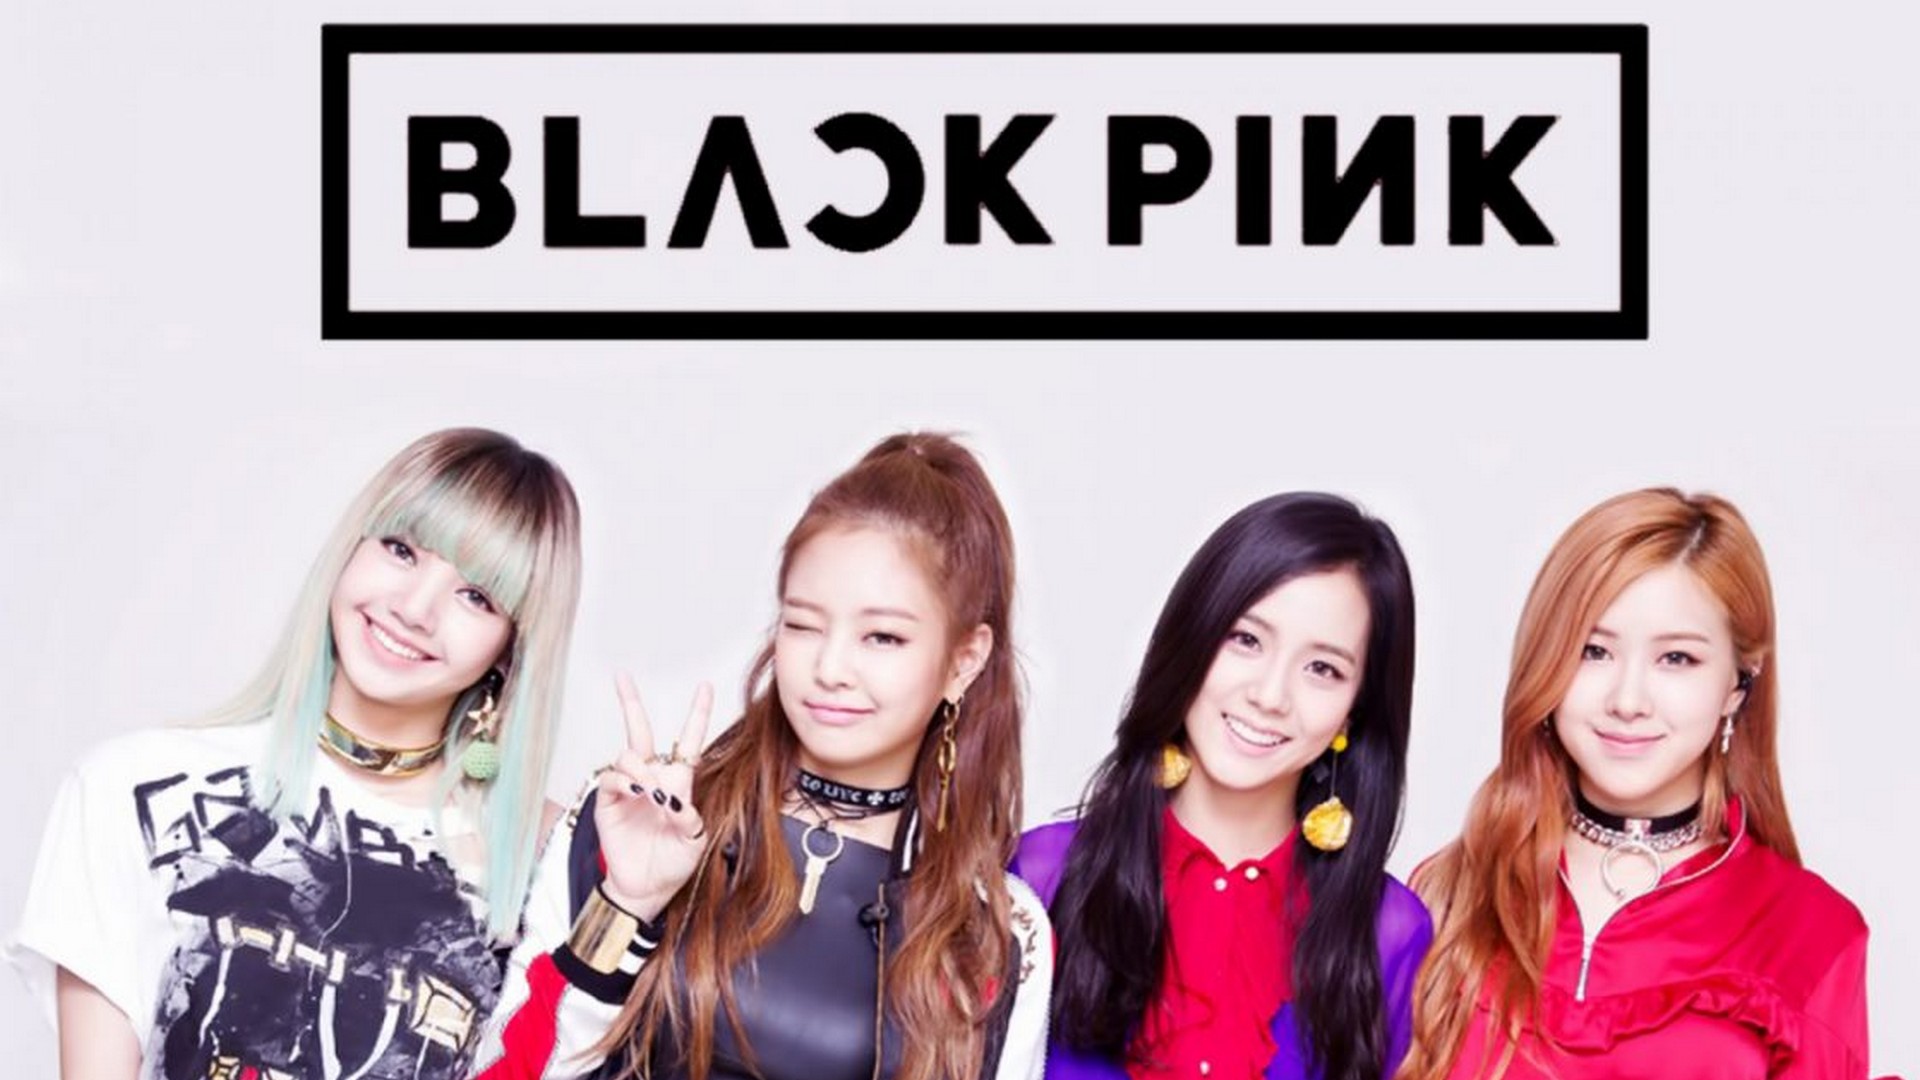 Blackpink Wallpaper With high-resolution 1920X1080 pixel. You can use this wallpaper for your Windows and Mac OS computers as well as your Android and iPhone smartphones